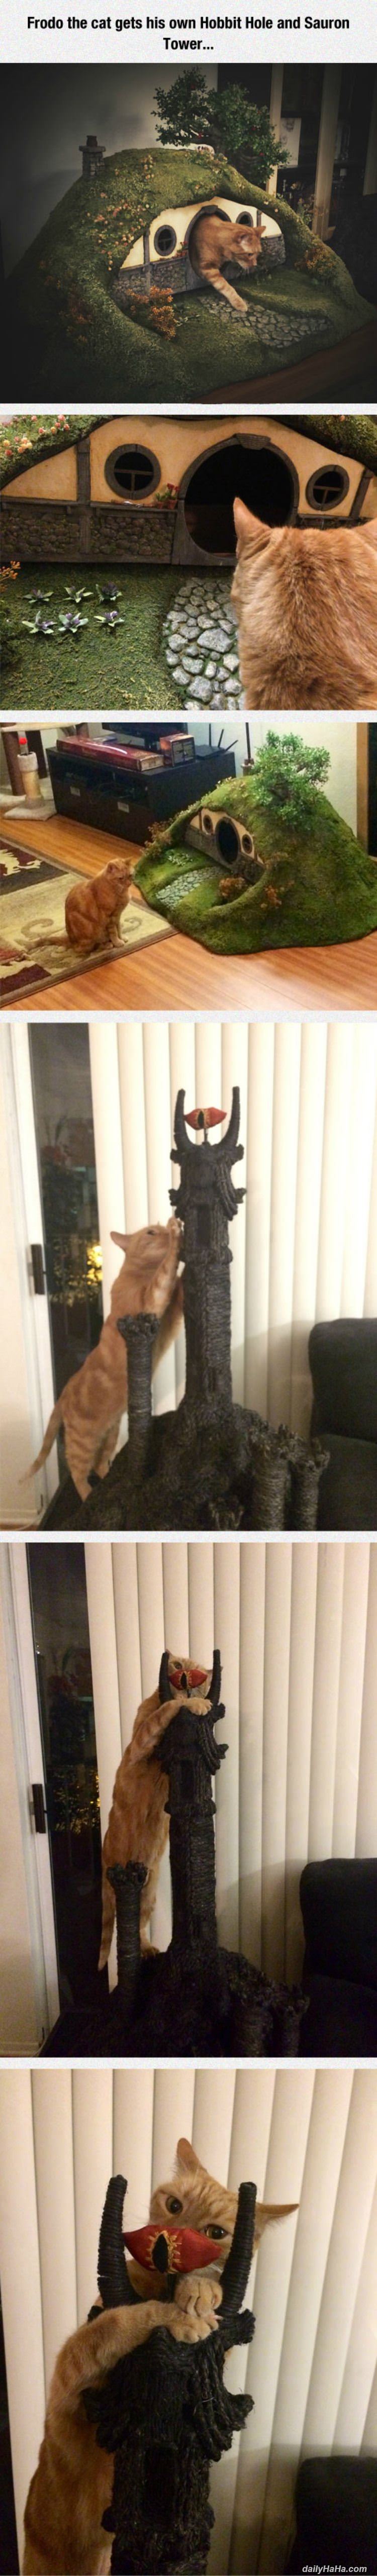 sauron tower cat funny picture